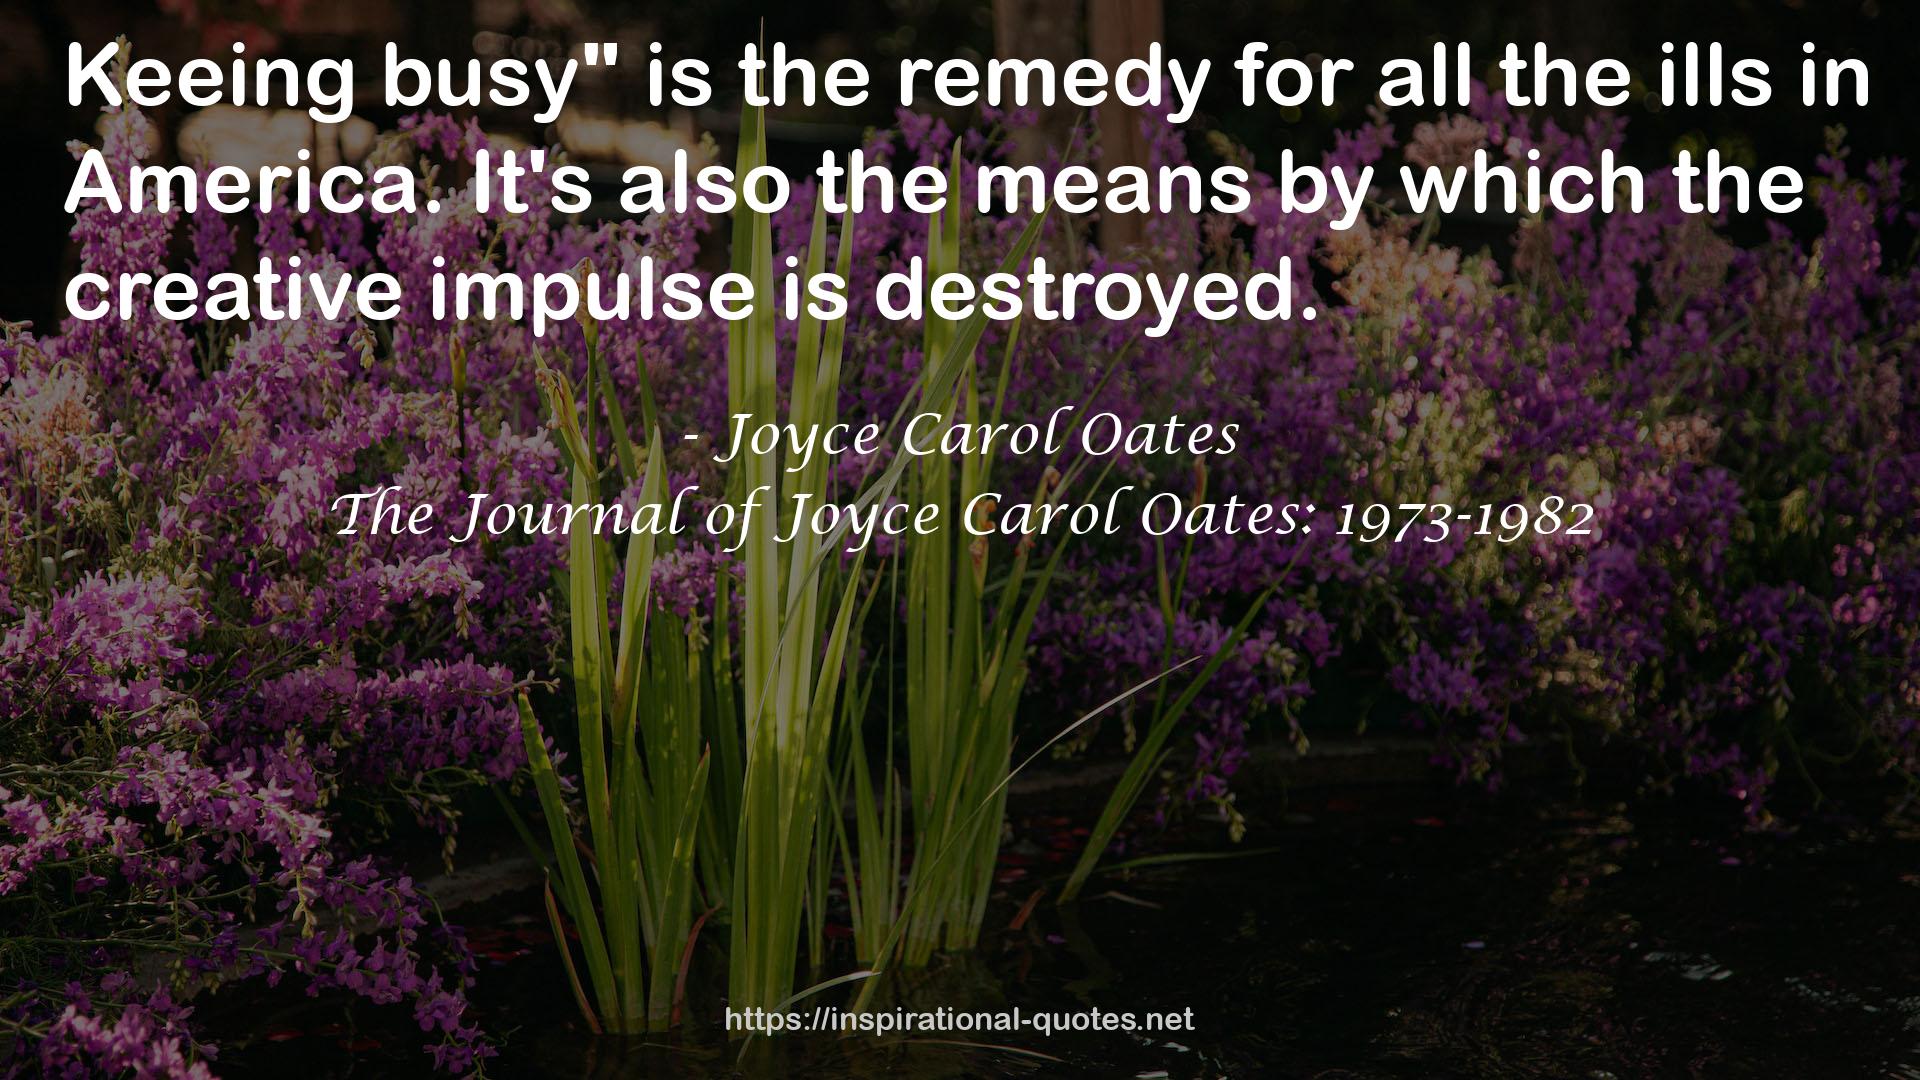 The Journal of Joyce Carol Oates: 1973-1982 QUOTES